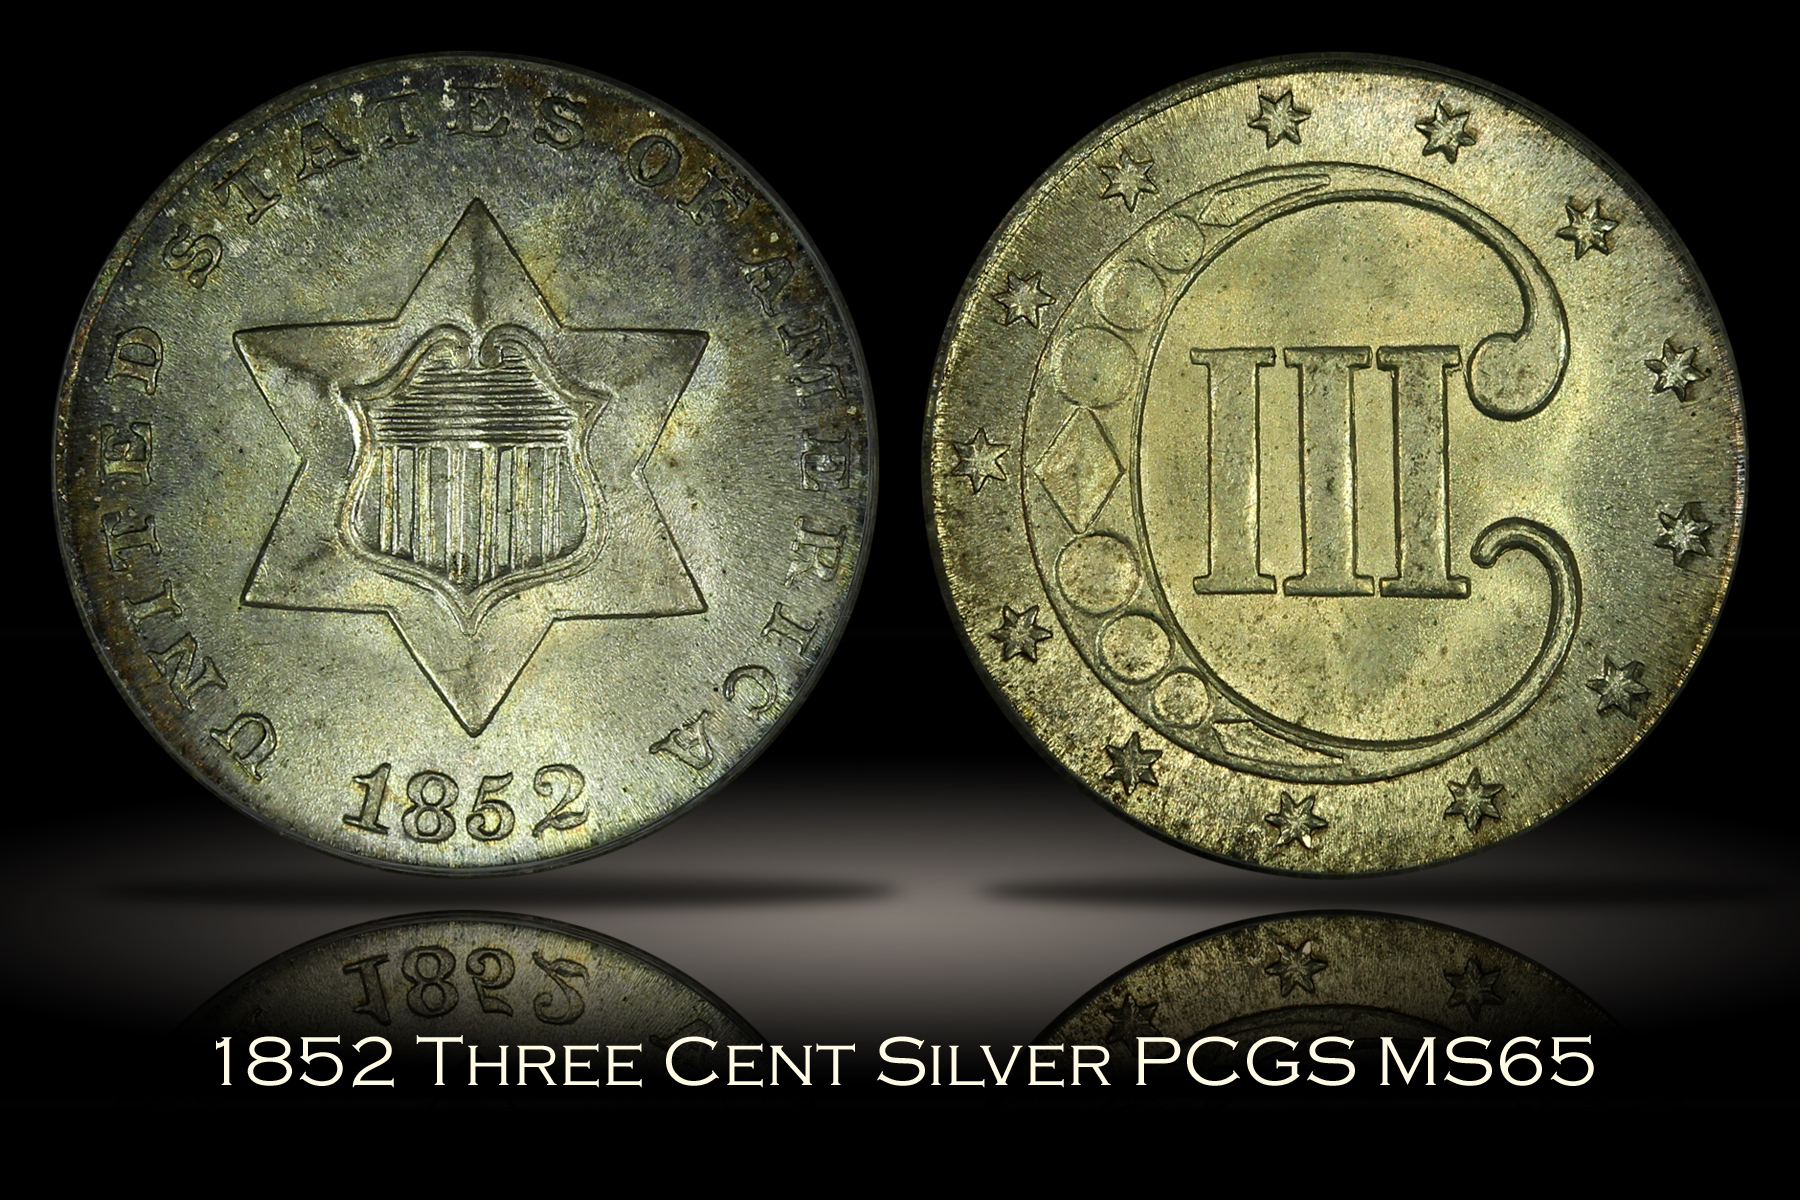 Michael Kittle Rare Coins - 1852 Three Cent Silver PCGS MS65